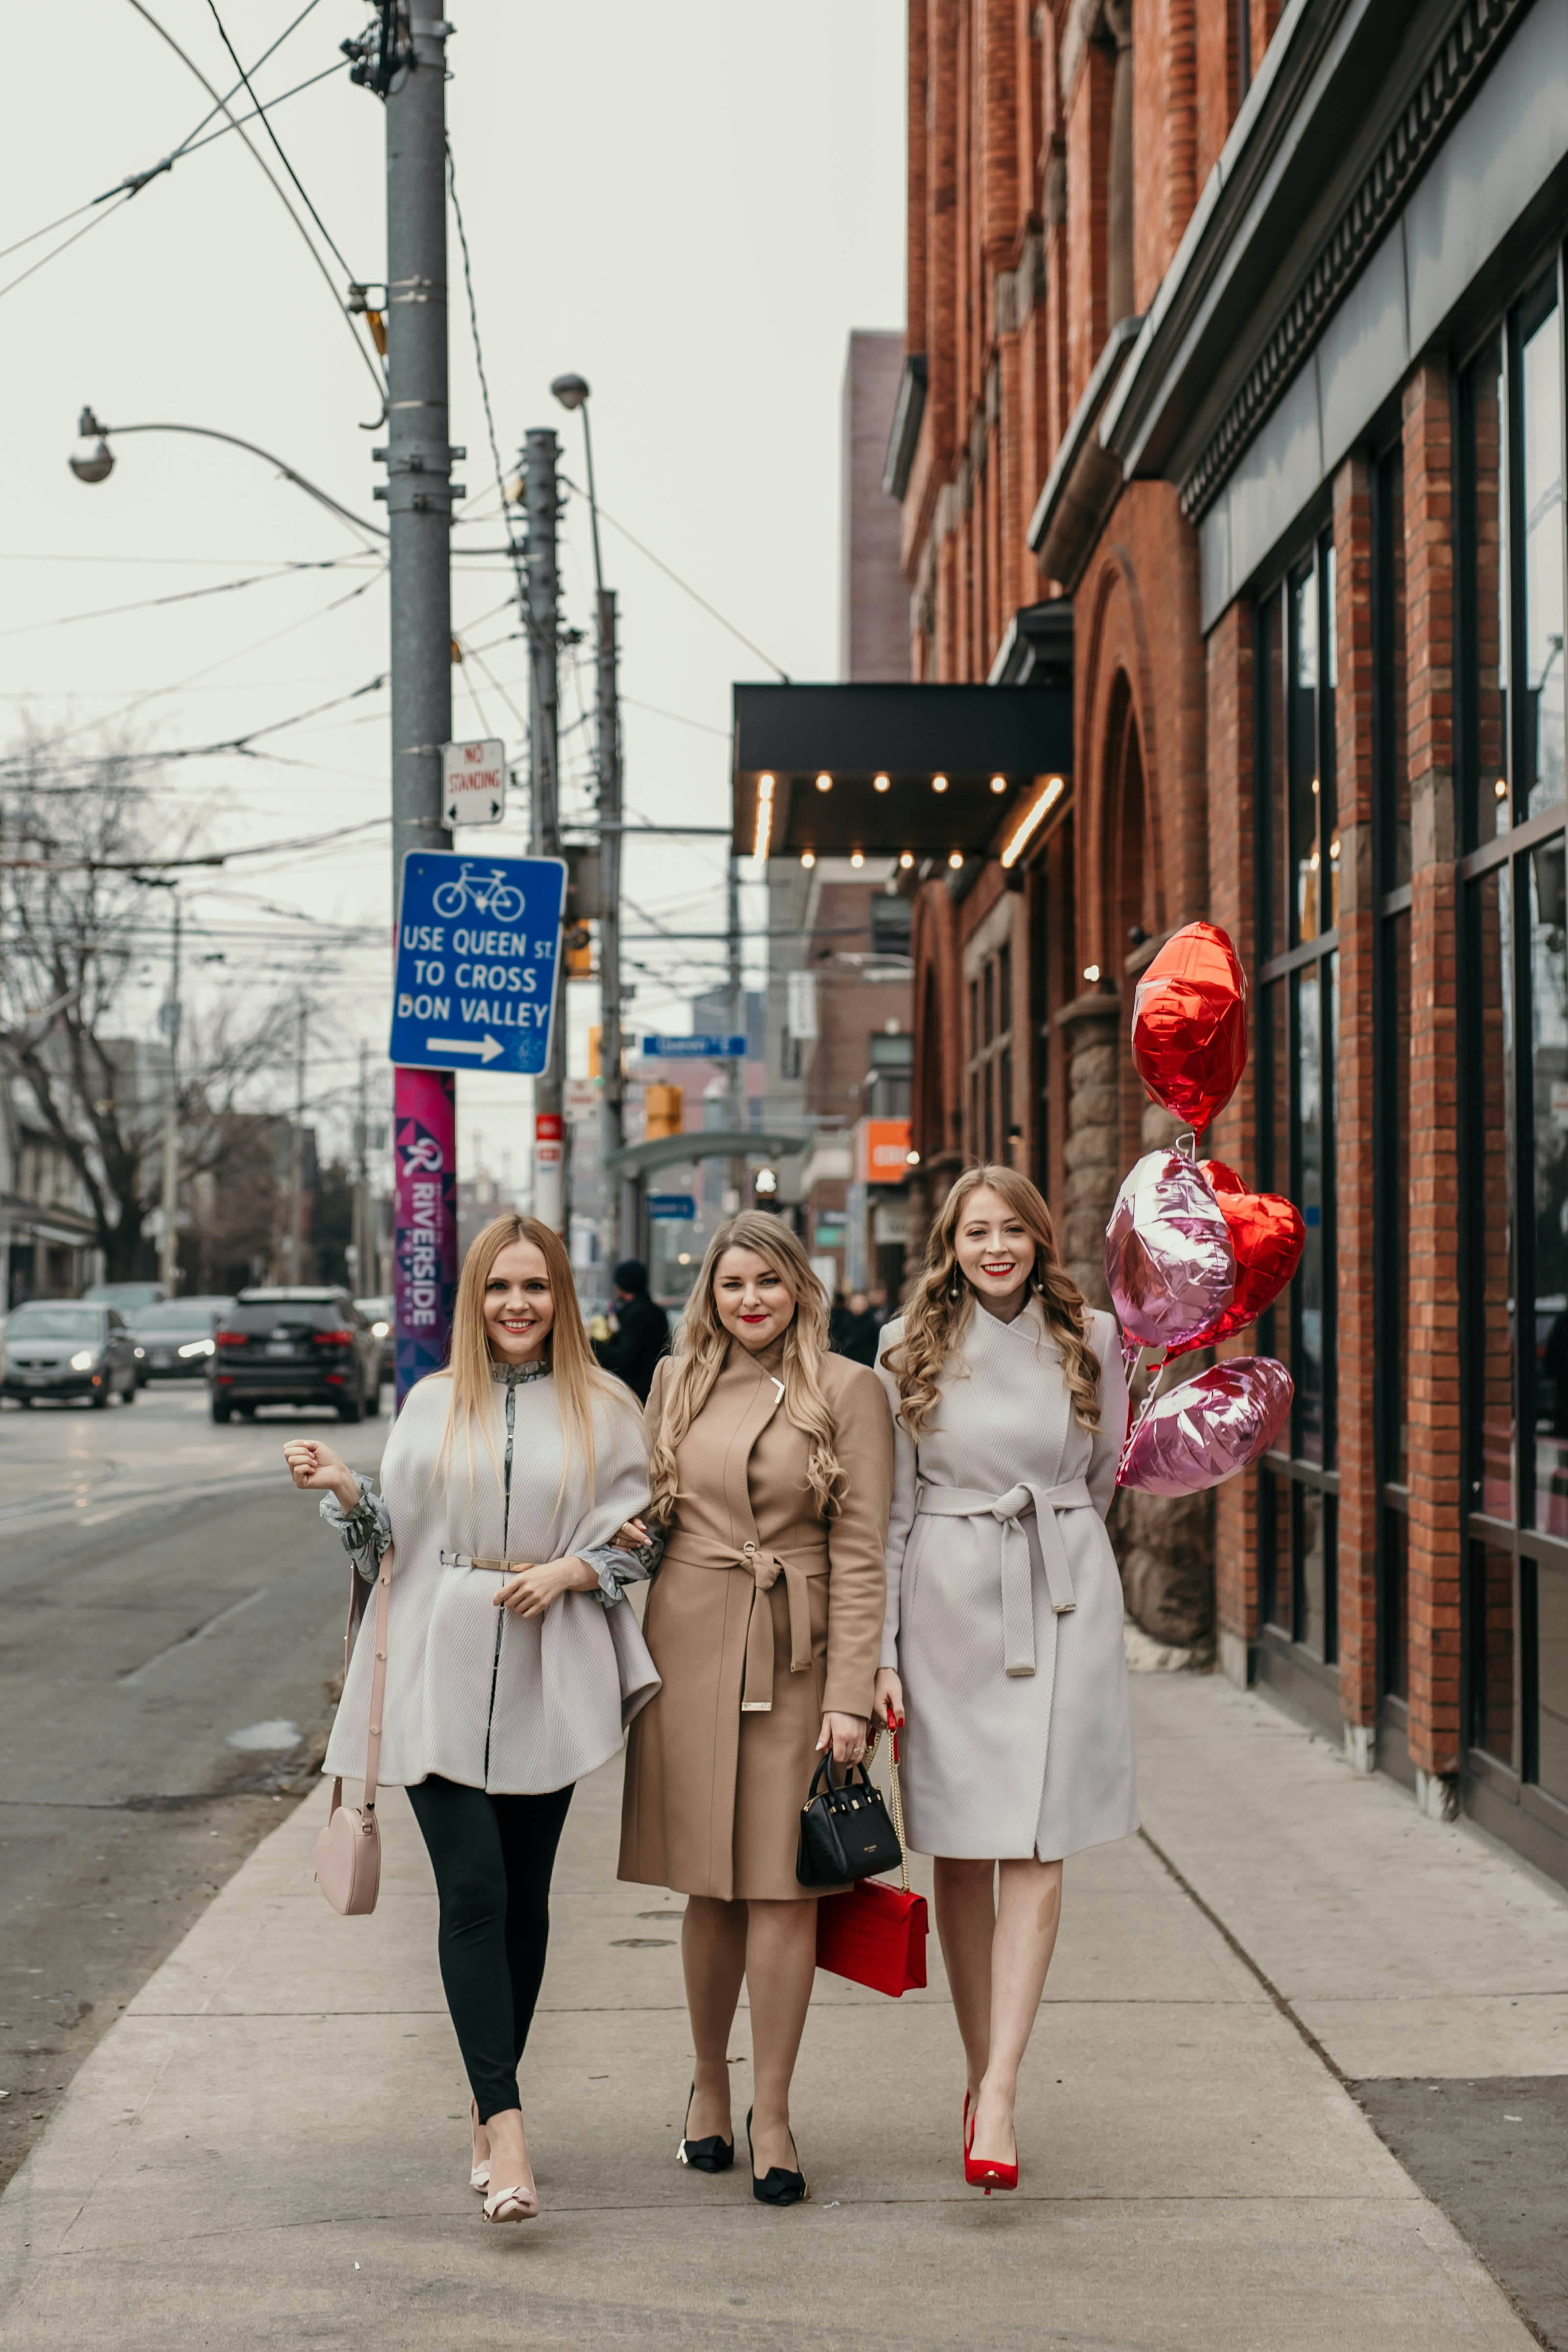 Valentine's Day Outfit Ideas: in february, grab a chic Ted Baker wool wrap coat, red pumps, a chic handbag and fun dress for an elegant festive look.